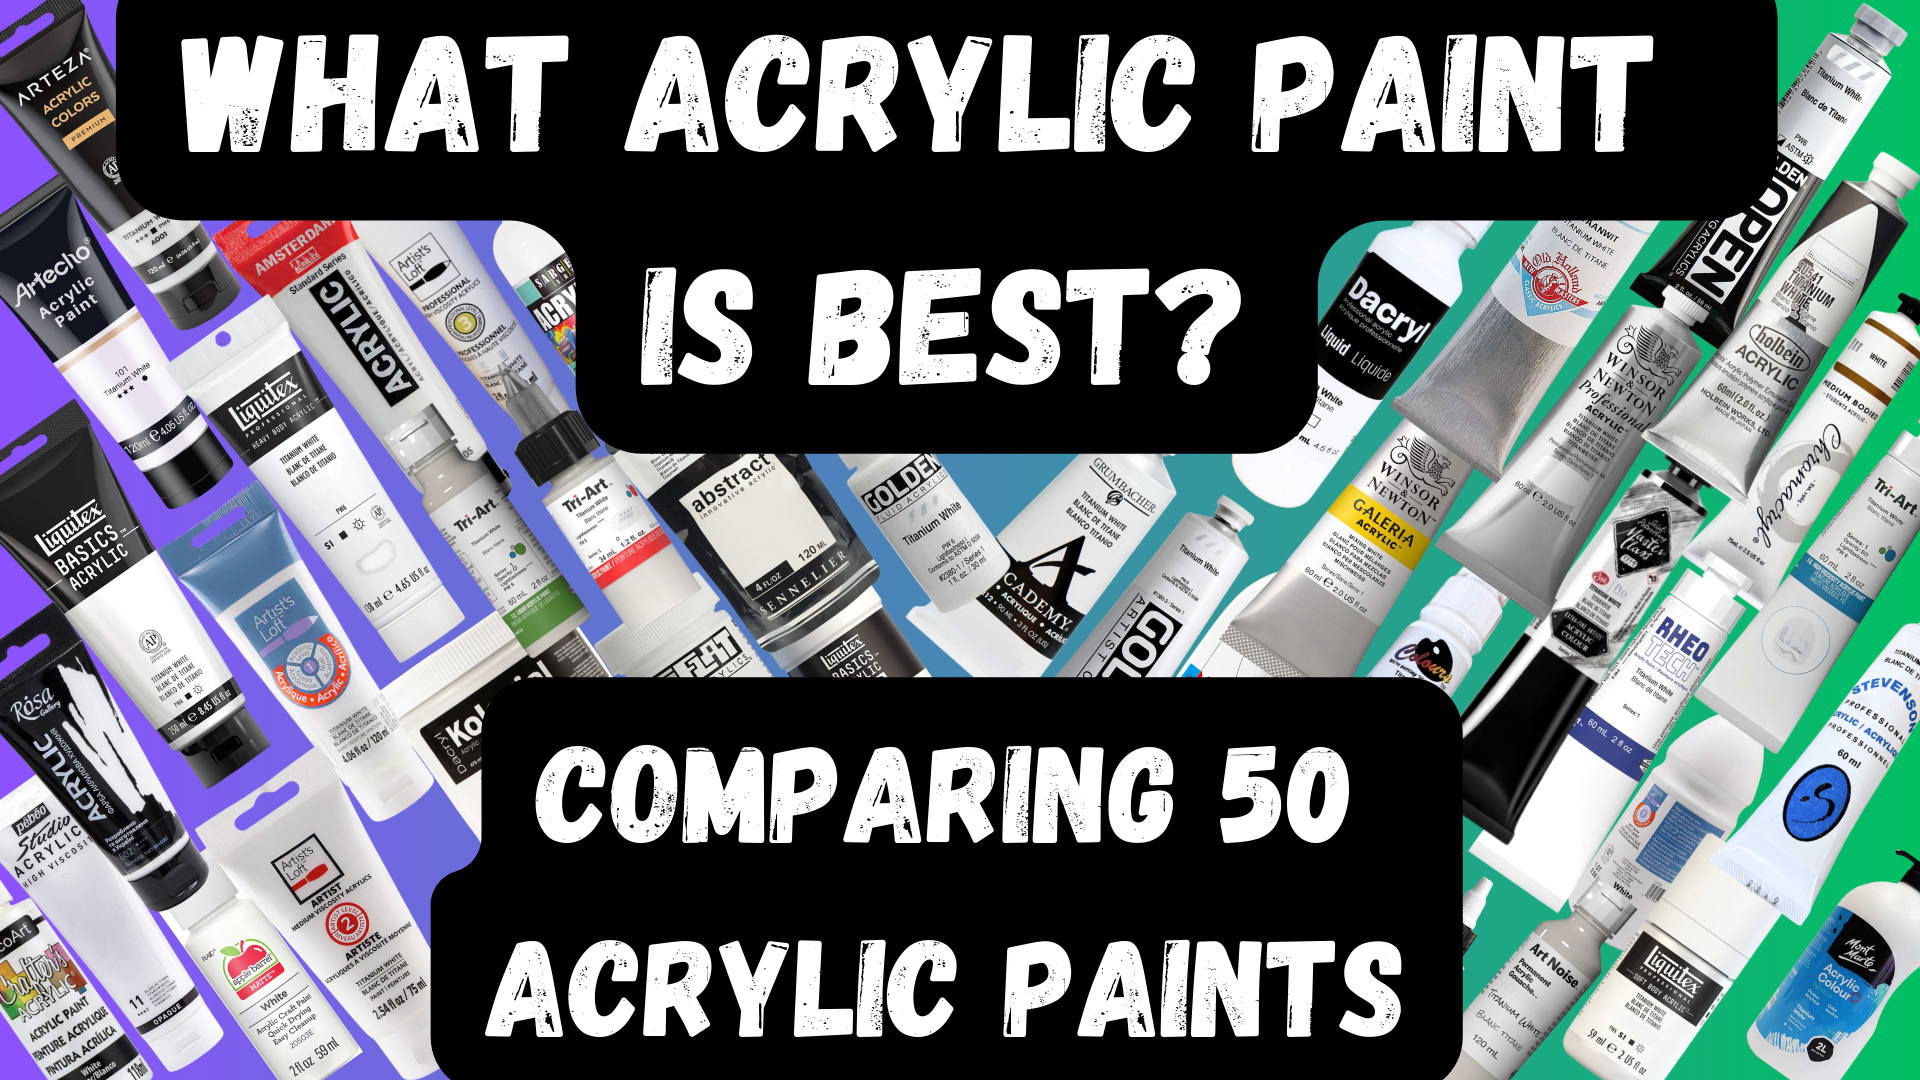 What Acrylic Paint is Best? – Comparing 50 Acrylic Paints – The Ultimate Acrylic Paint Guide